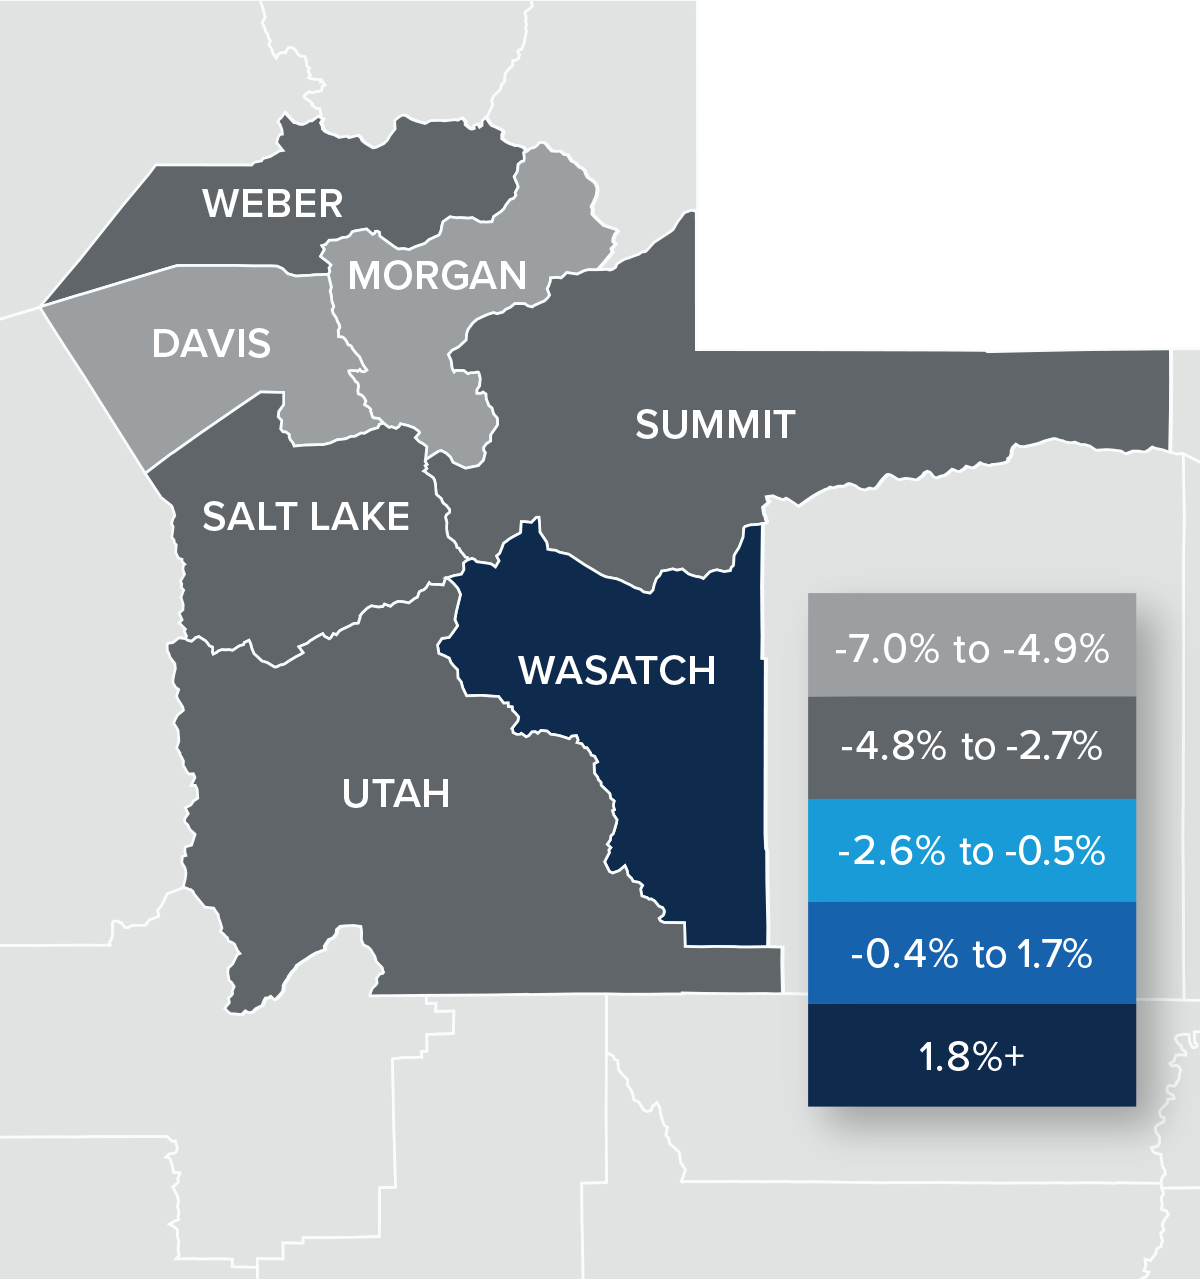 A map showing the real estate home prices percentage changes for various counties in Utah. Different colors correspond to different tiers of percentage change. Morgan and Davis counties have a percentage change in the -7% to -4.9% range, Weber, Salt Lake, Summit, and Utah are in the -4.8% to -2.7% change range, and Wasatch is in the 1.8%+ change range.